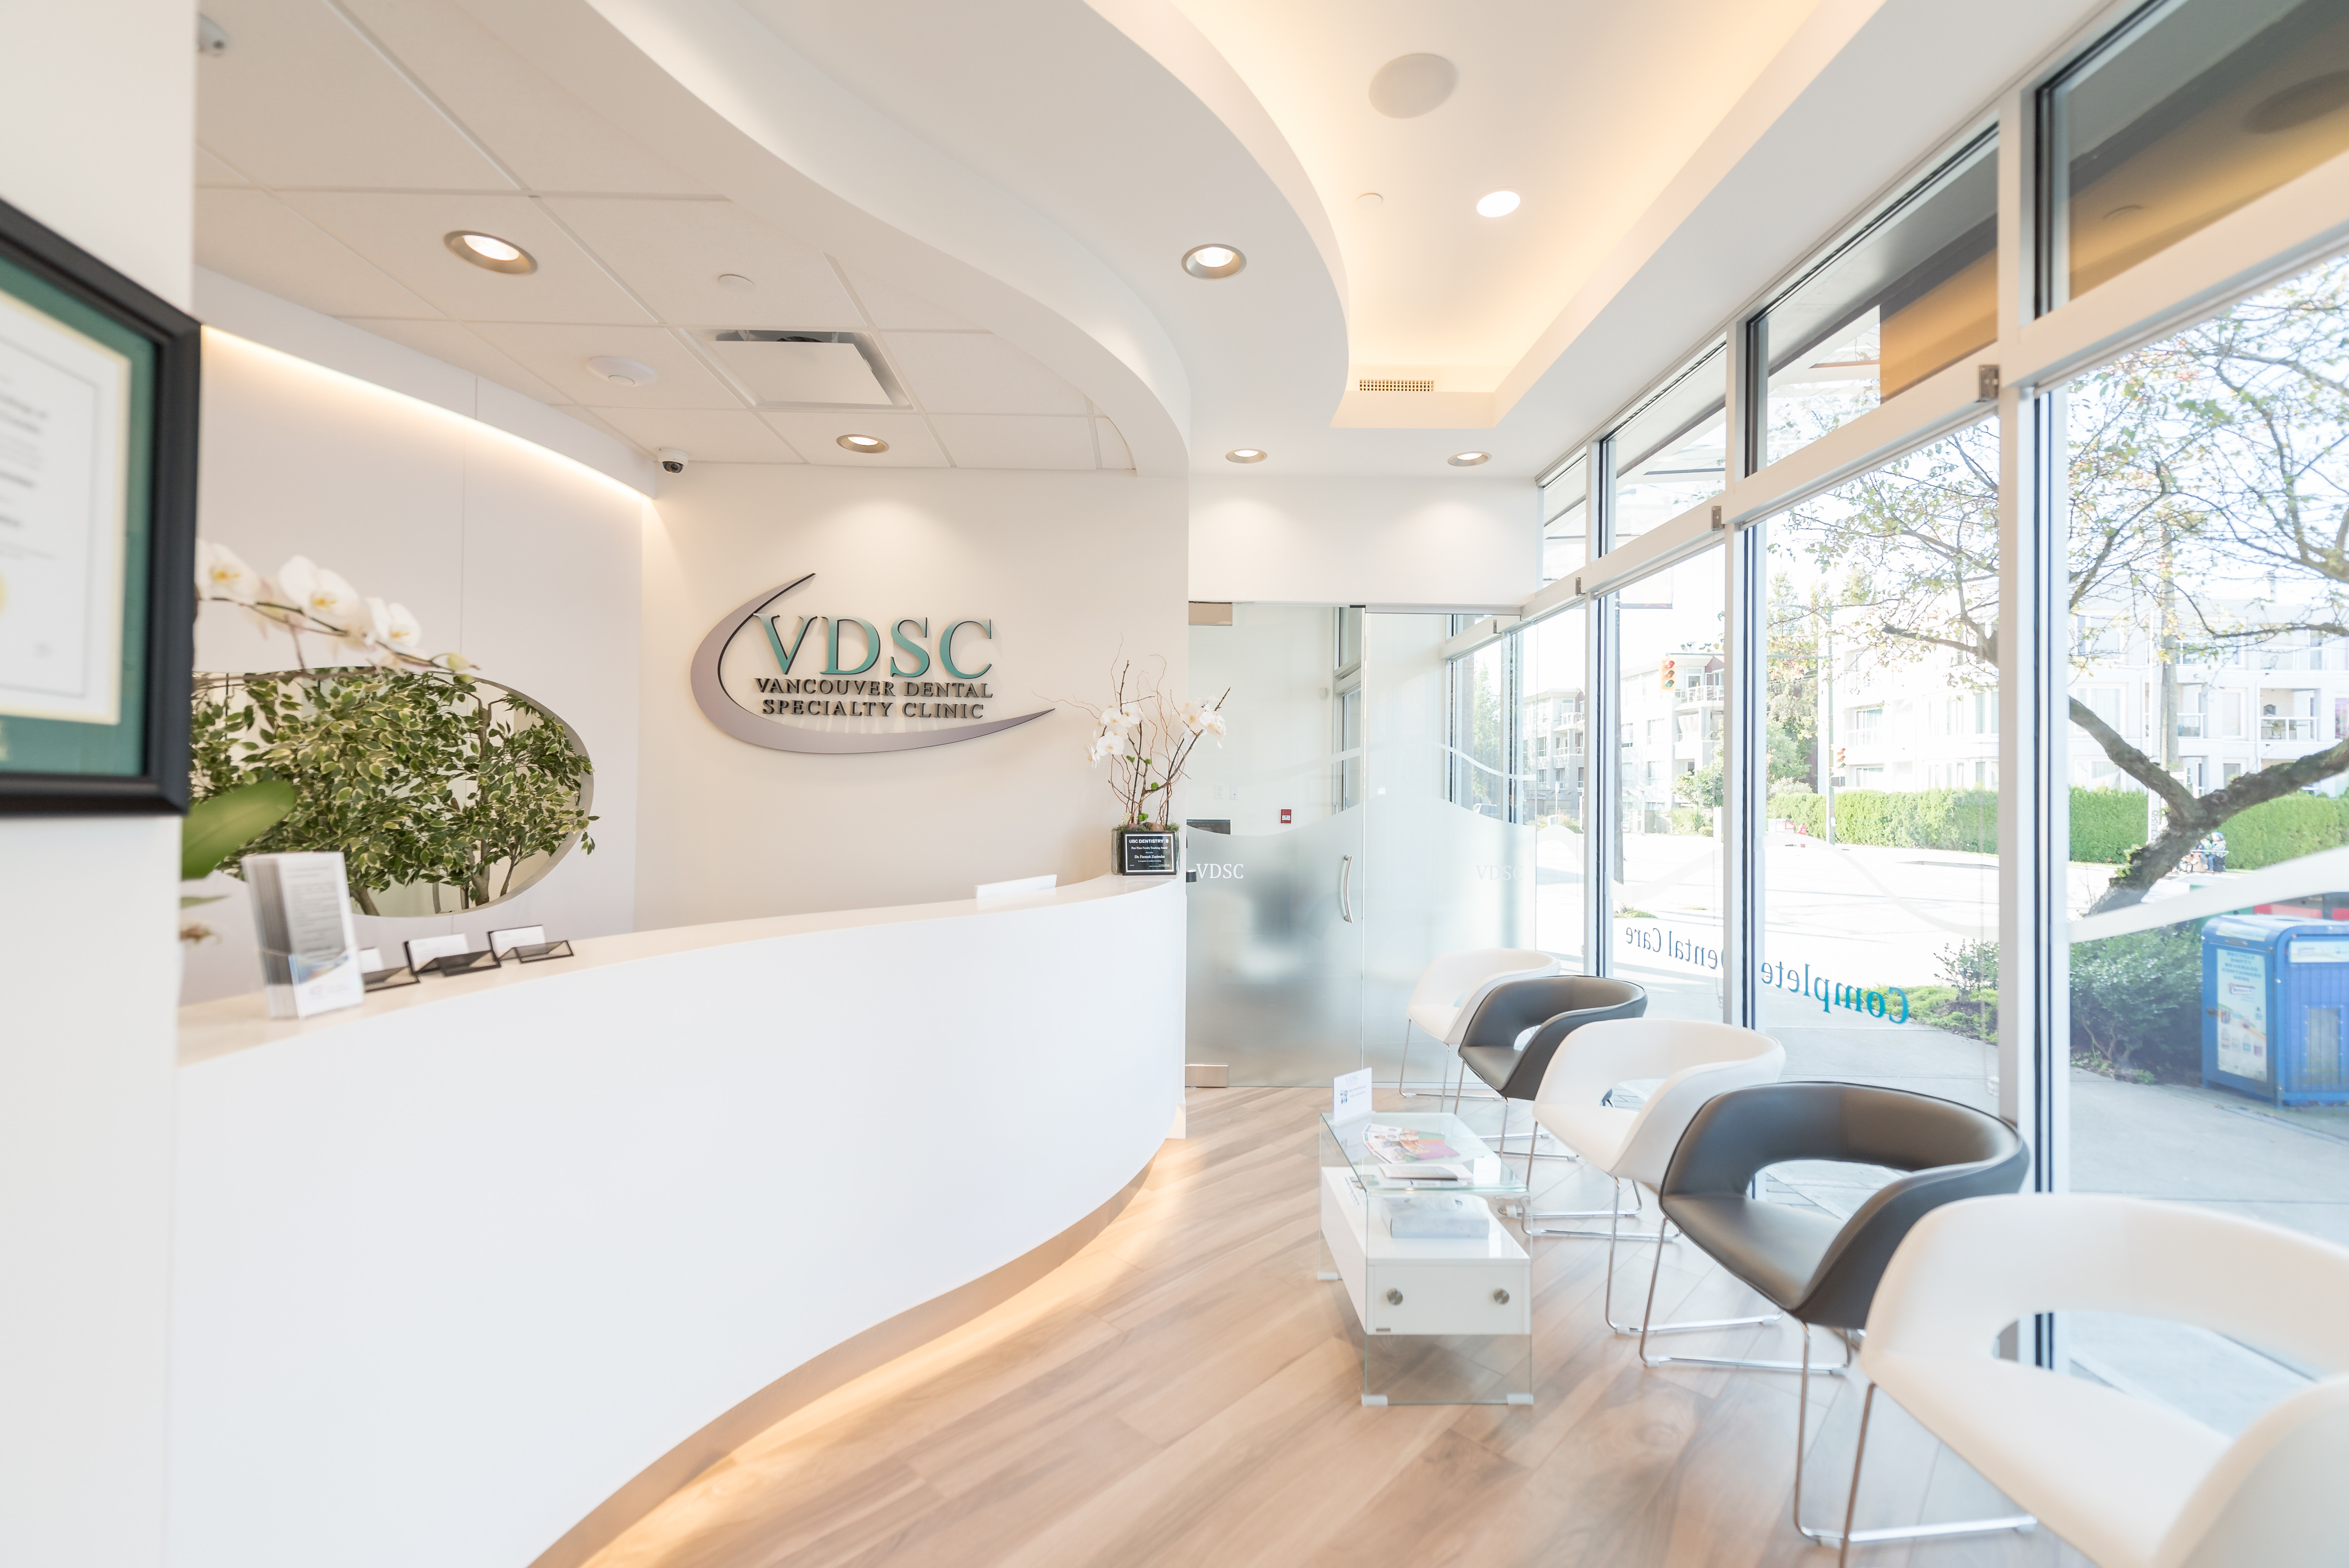 VANCOUVER DENTAL SPECILALTY CLINIC